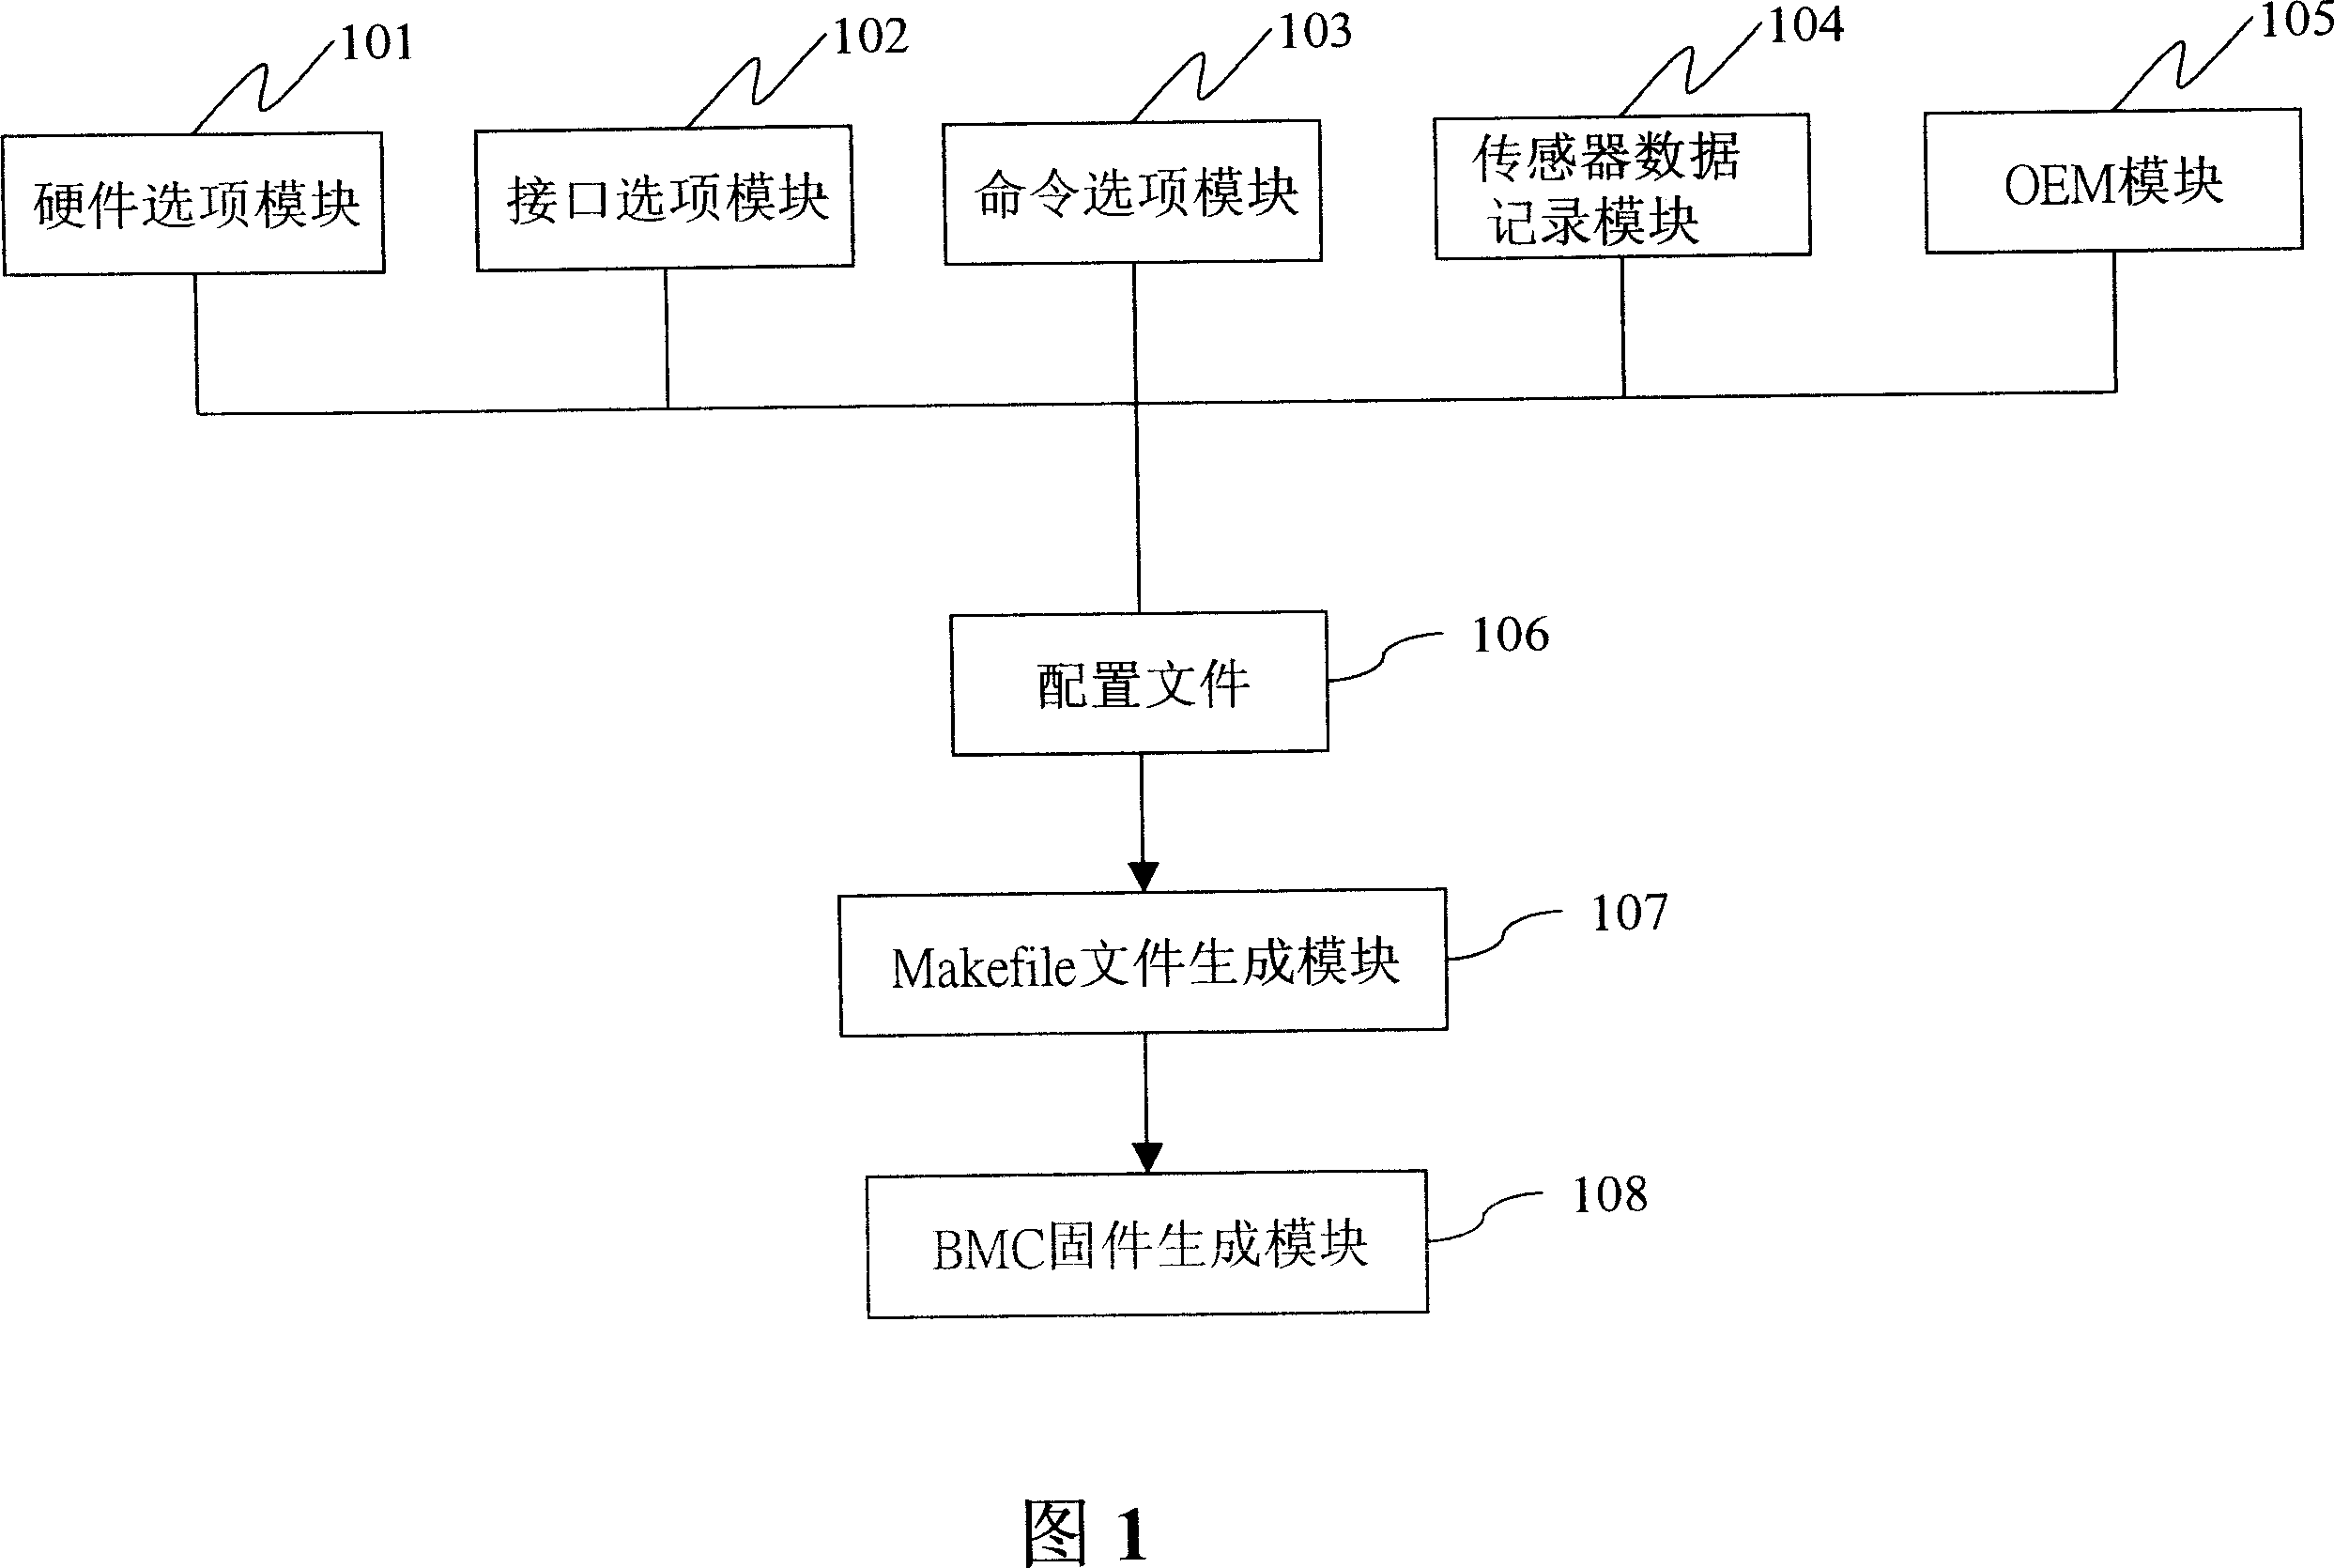 Firmware automatic configuration system and method for substrate management controller